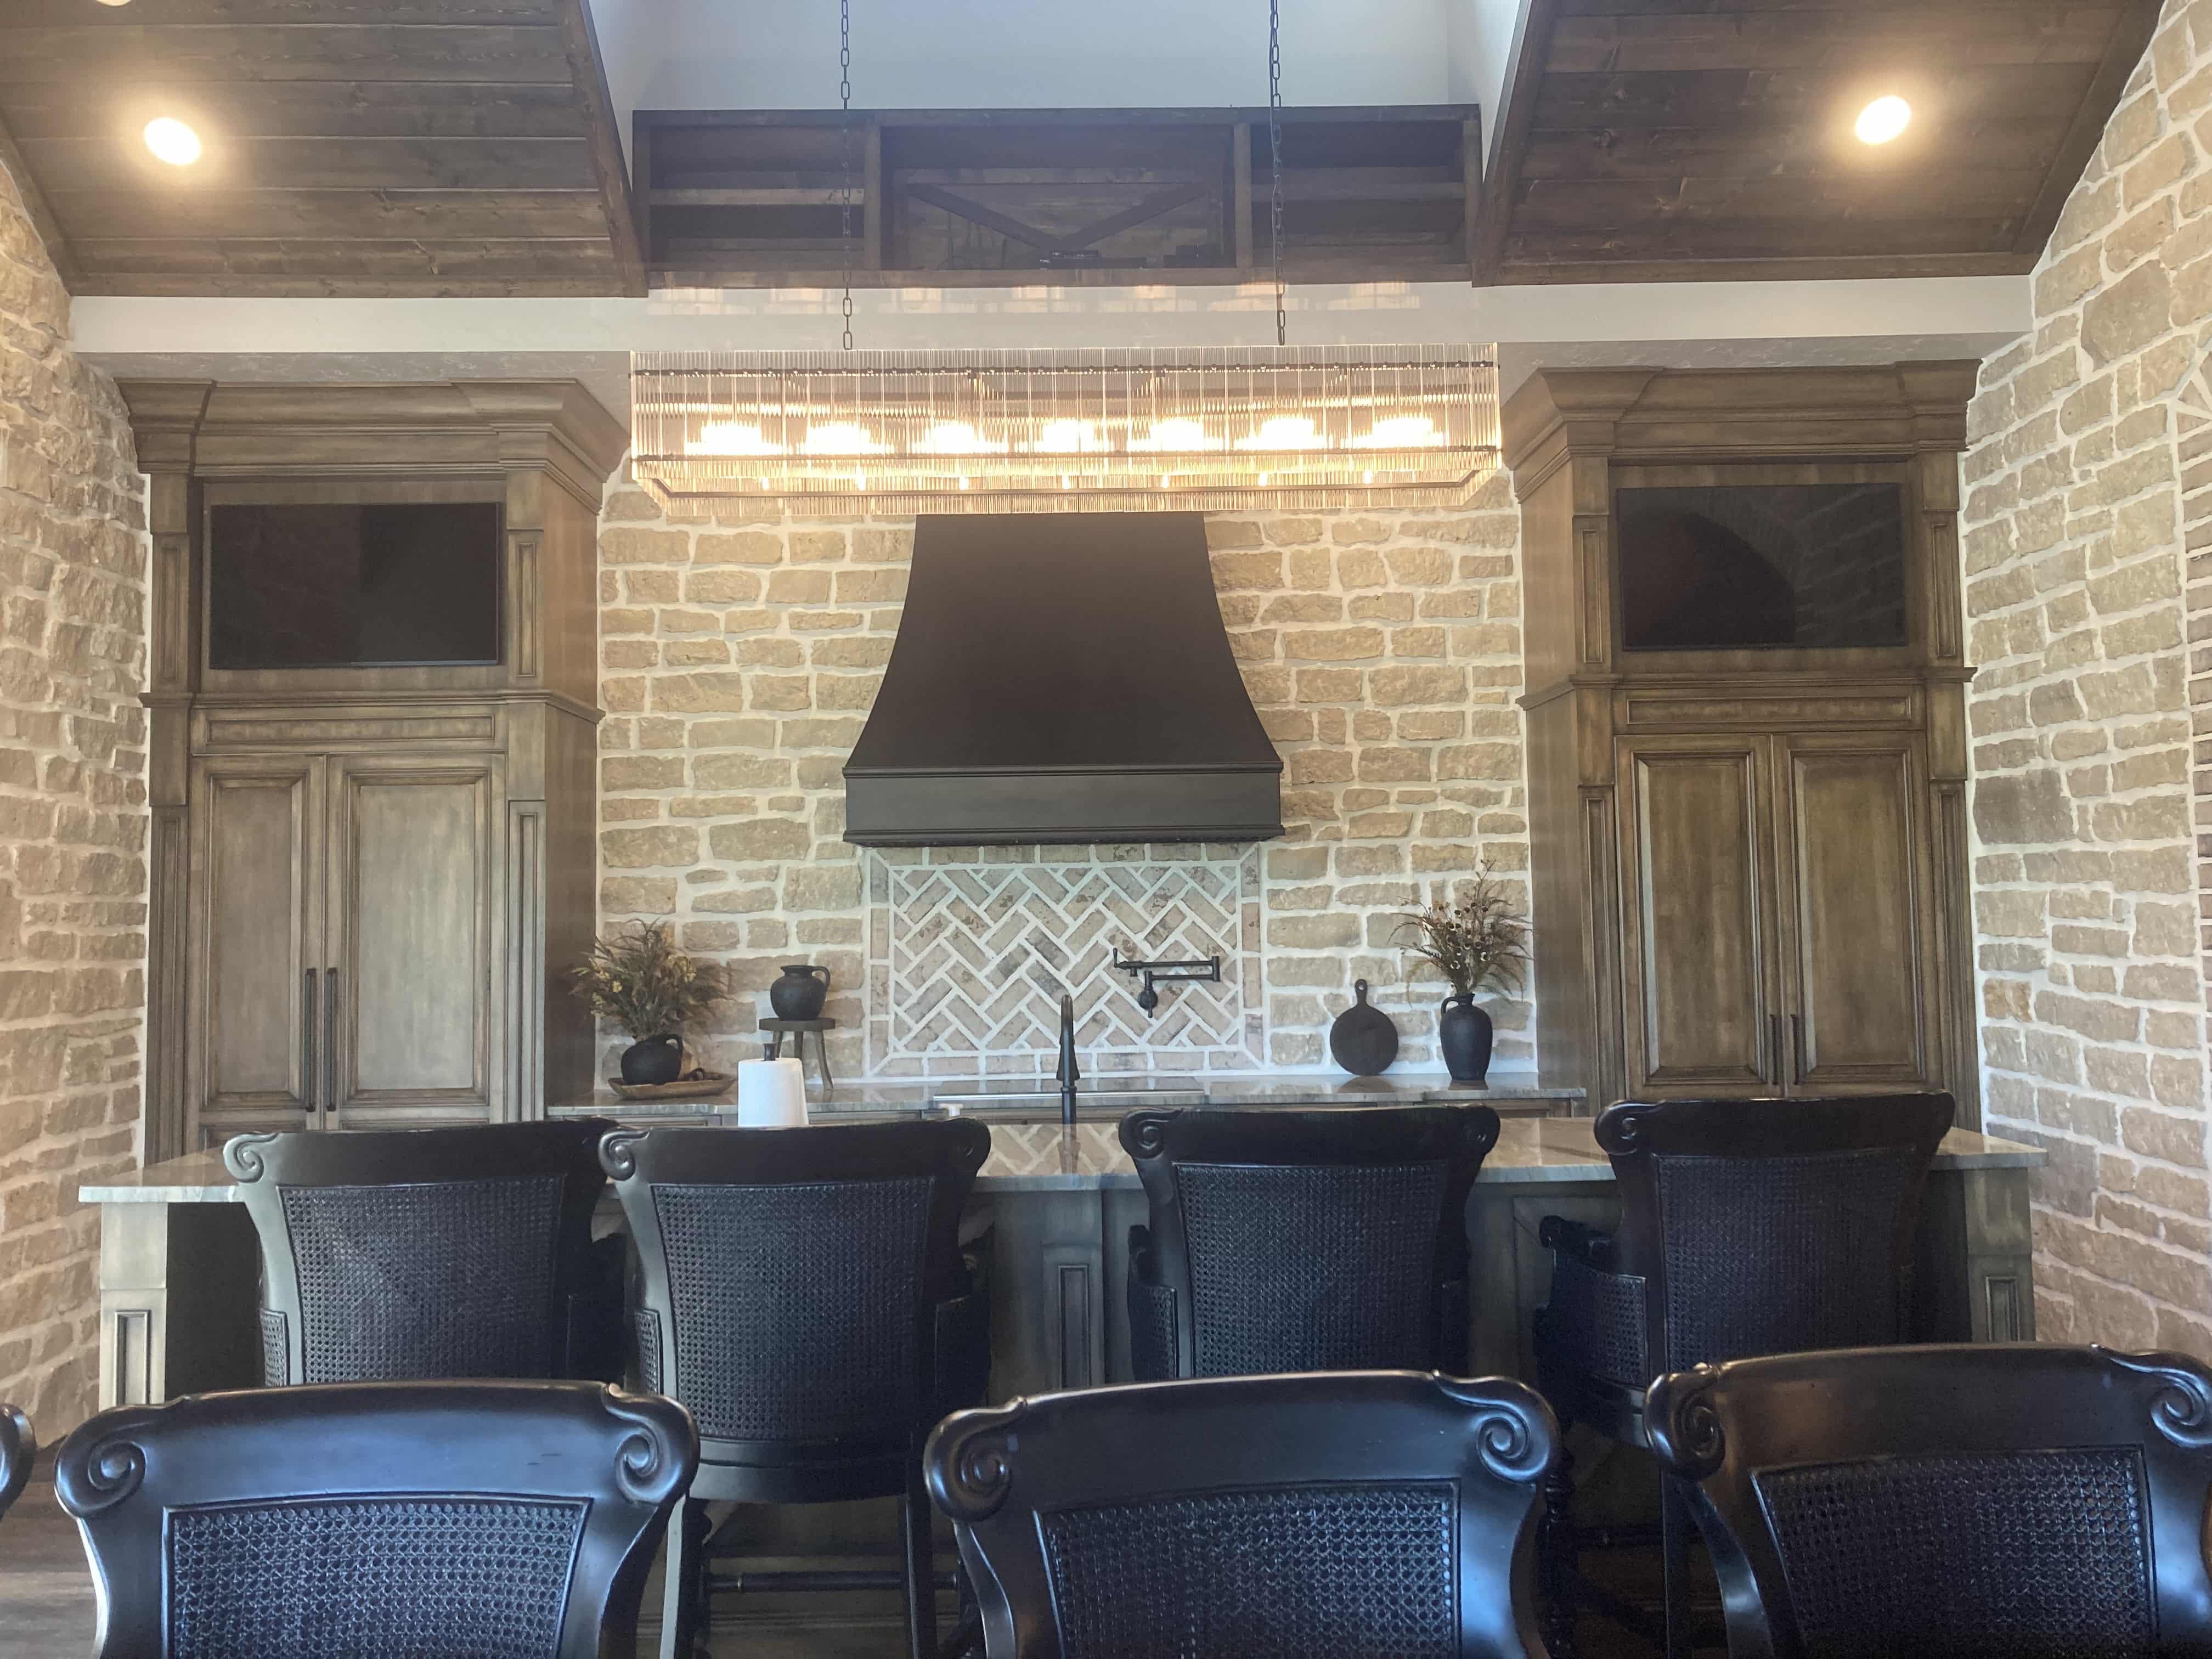 CopperSmith Signature SX5 Wall Mount Black Enamel Smooth Range Hood with Straps in a Country style kitchen with stone backsplash marble countertops and wood cabinets